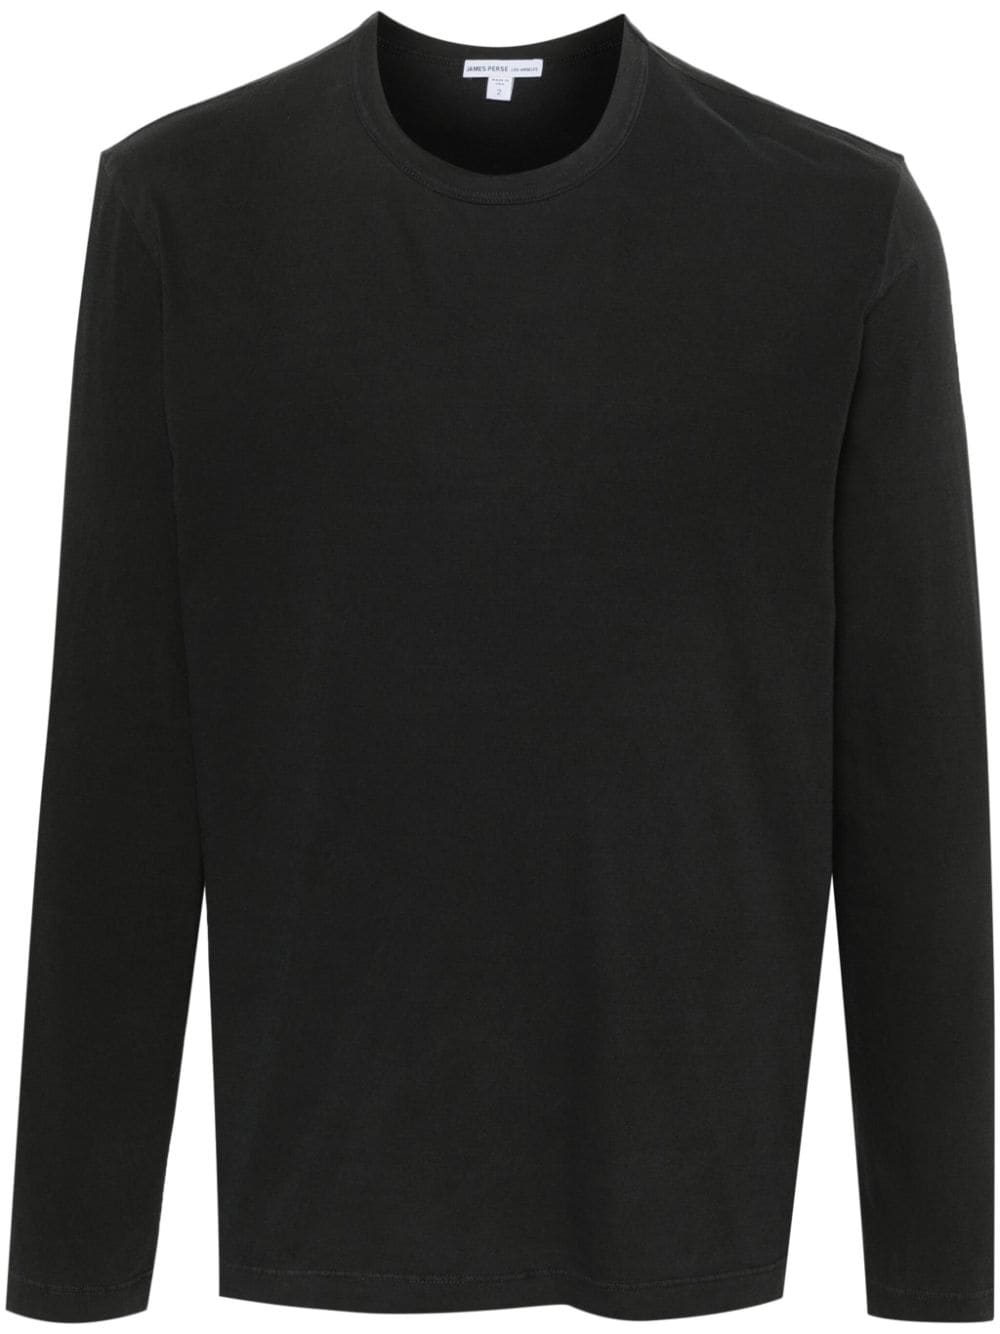 James Perse long-sleeve T-shirt - Grey von James Perse